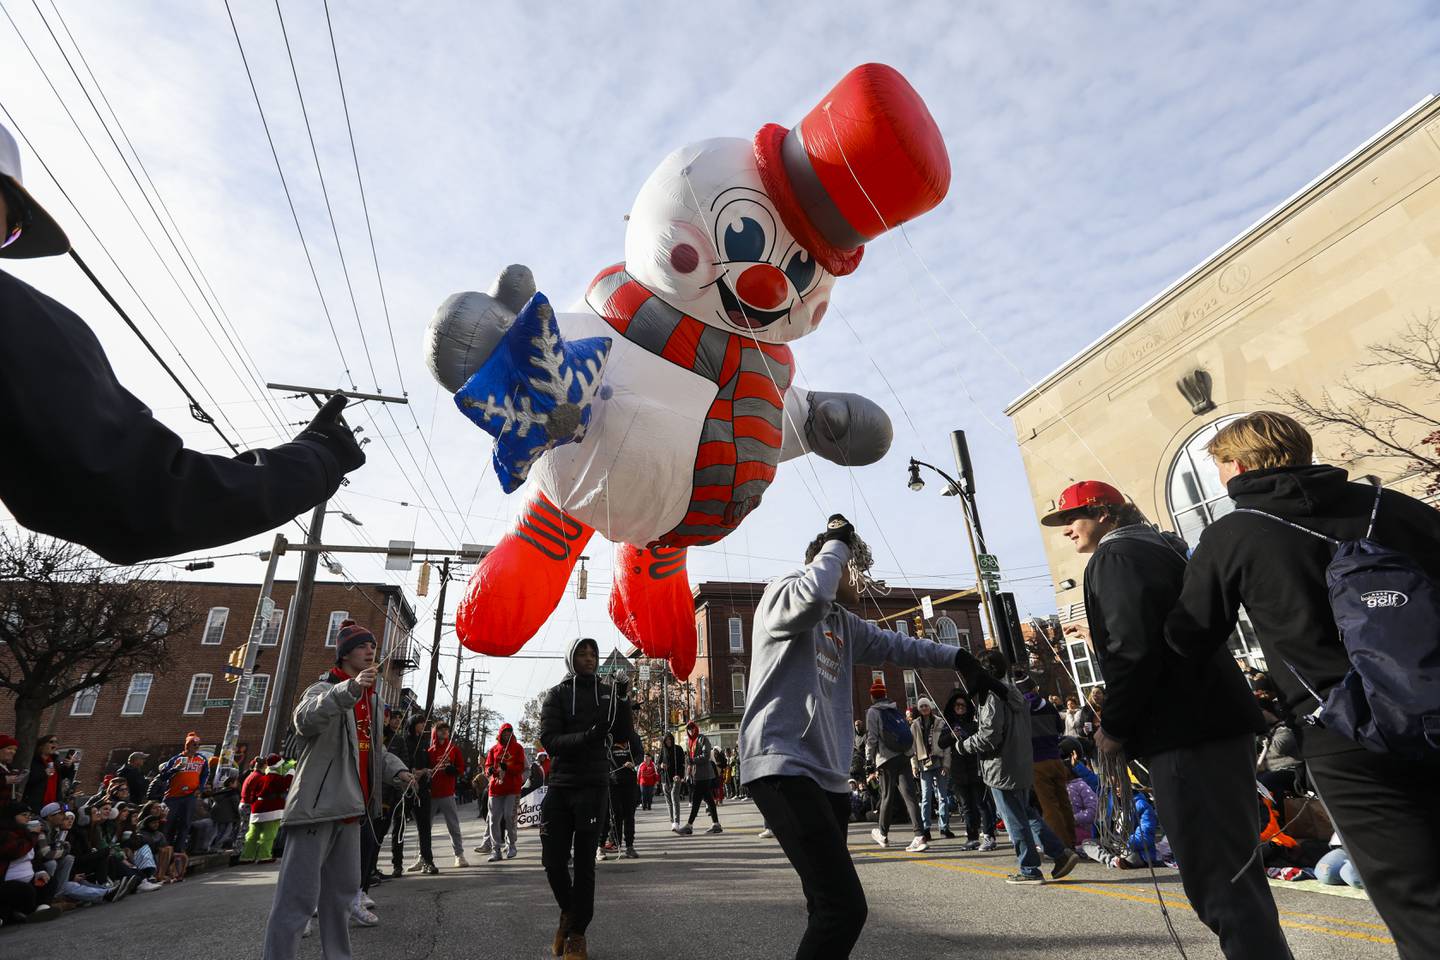 Scenes from Hampden's Annual Holiday Parade on December 4, 2022.